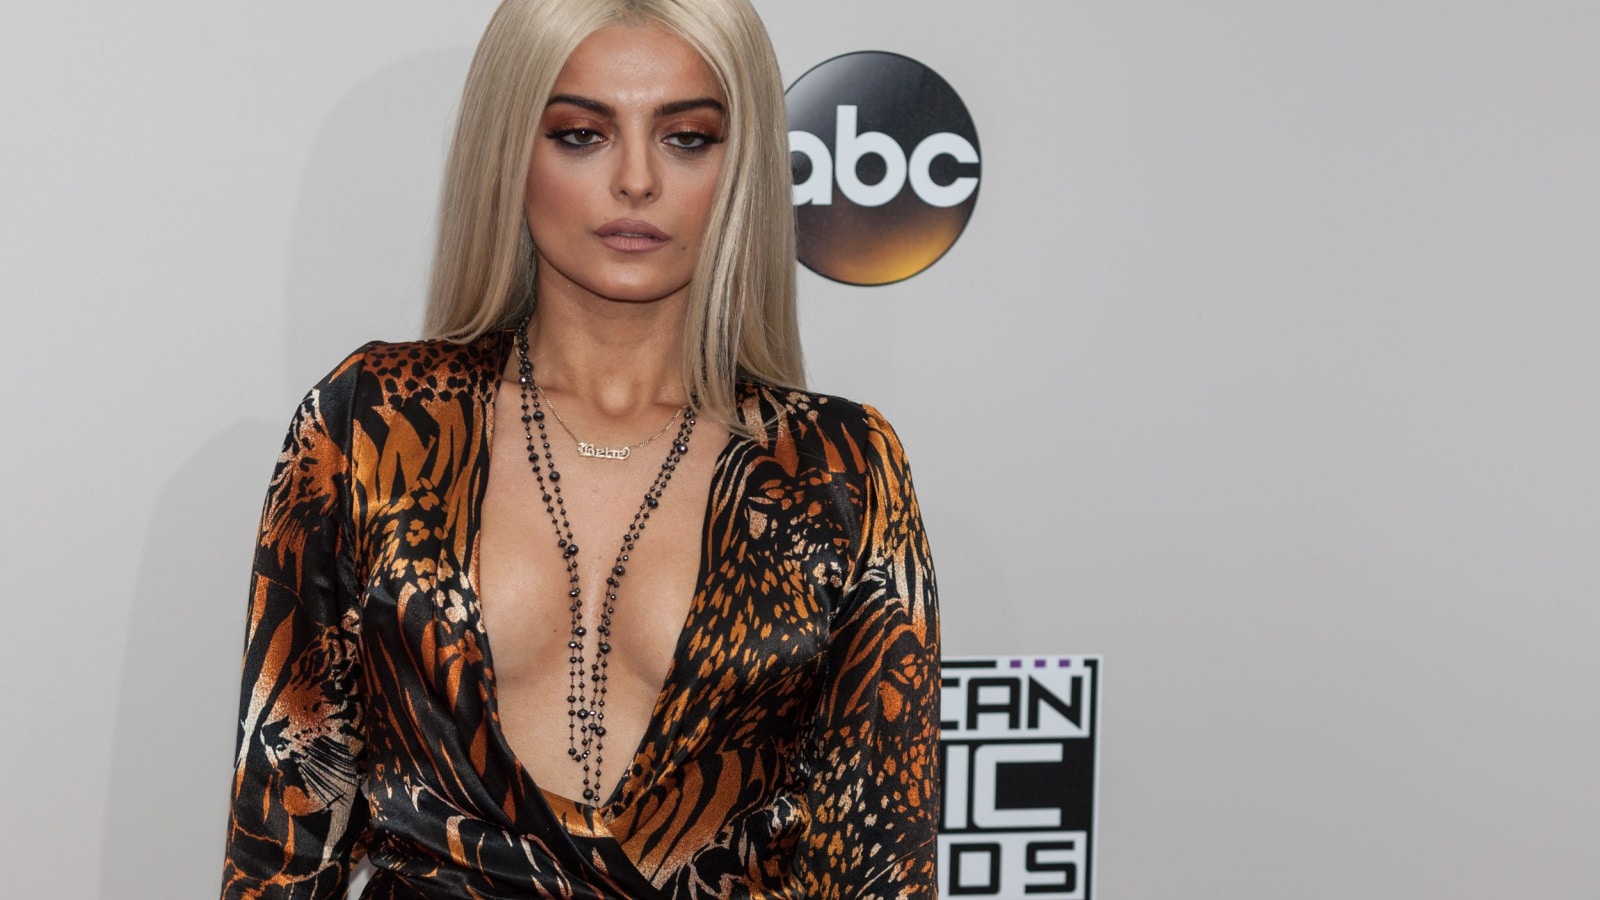 Bebe Rexha attends the 2016 American Music Awards in los Angeles, California at the Microsoft Theater on November 20,2016